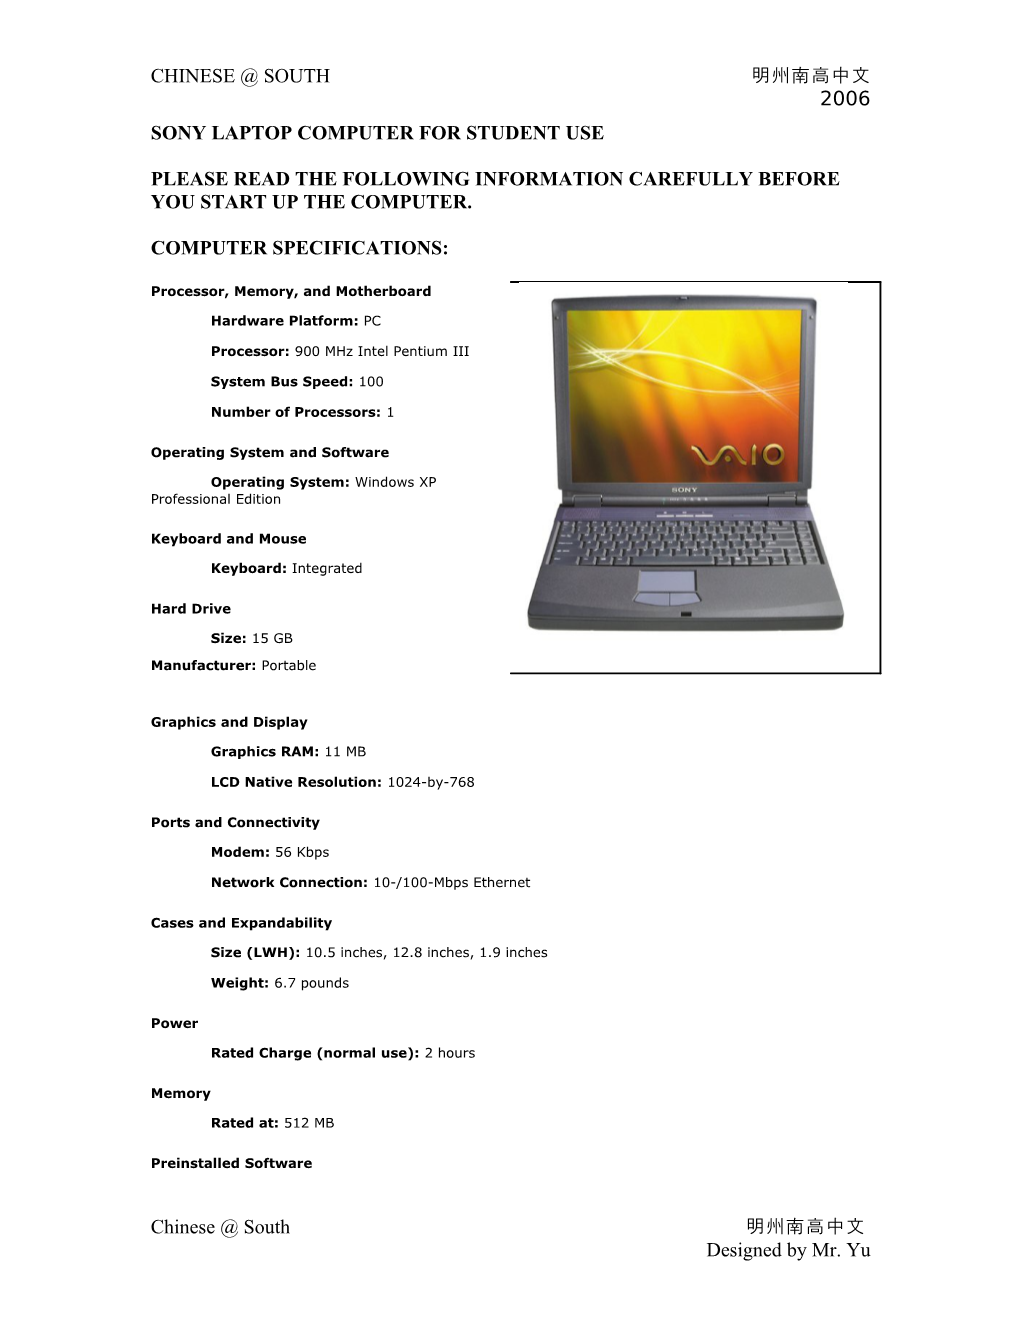 Sony Laptop Computer for Student Use